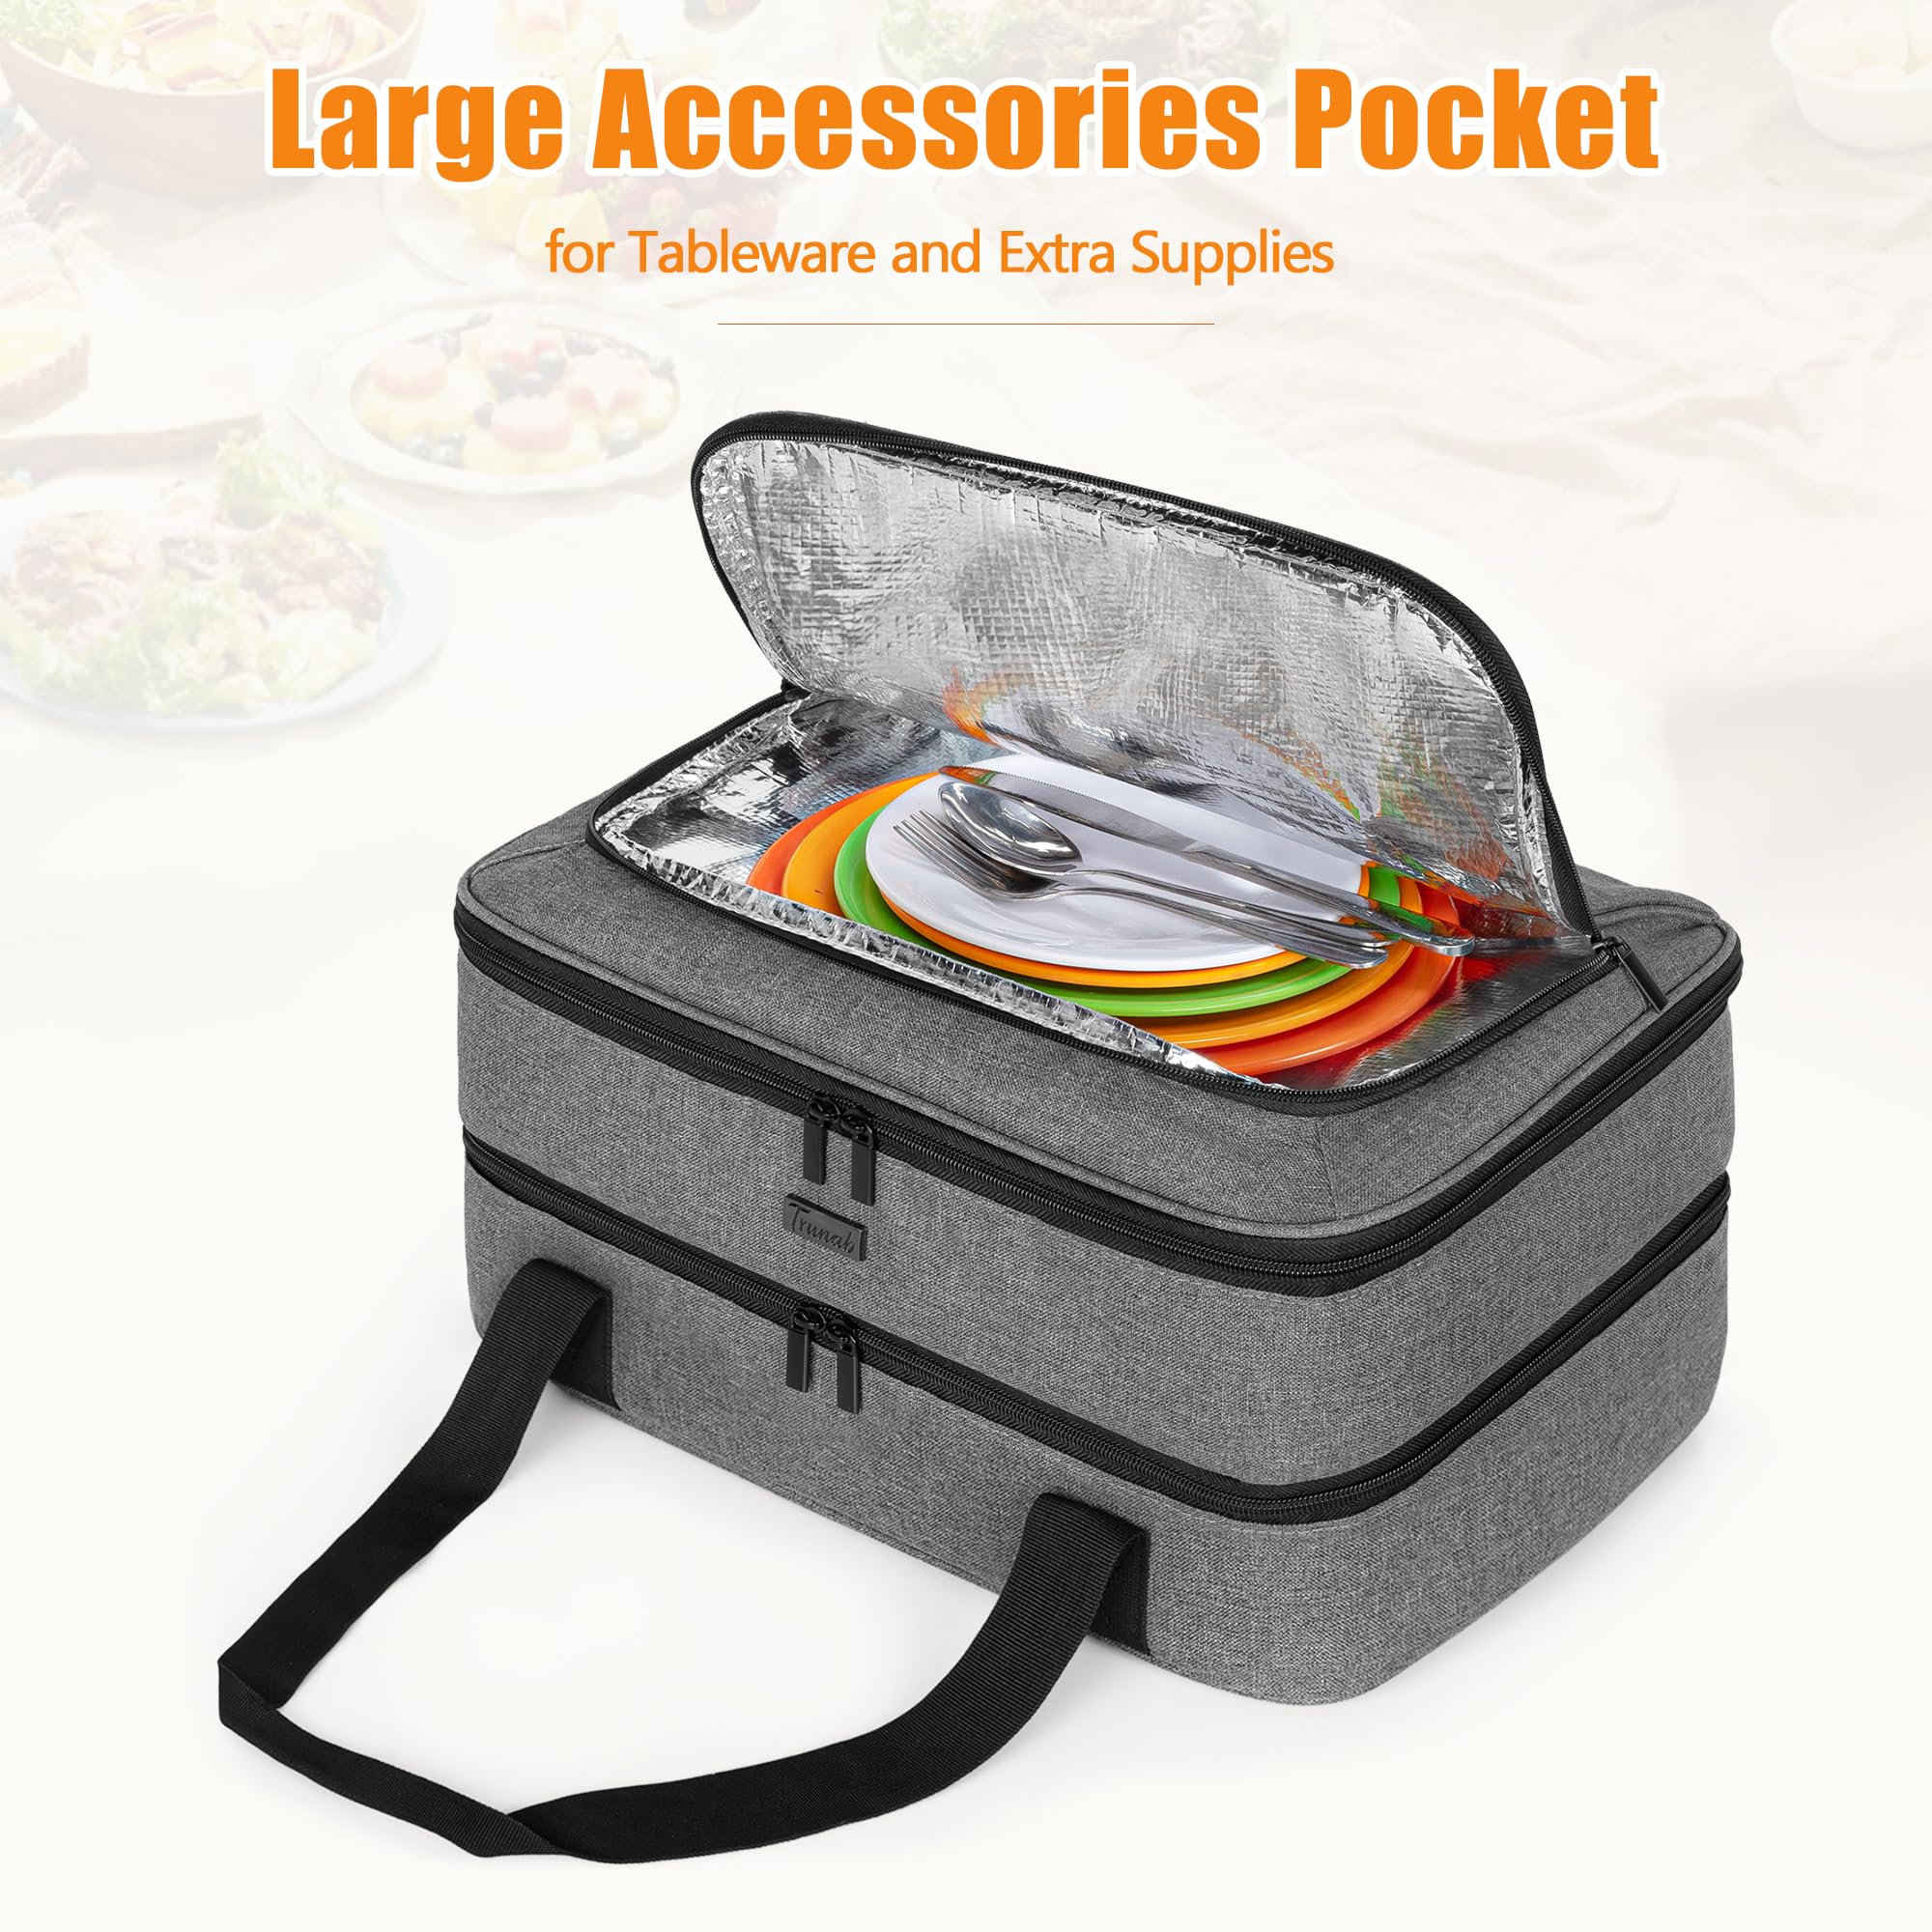 Trunab Double Decker Casserole Carrier for Hot or Cold Food Insulated Casserole Dish Carrier Thermal Tote Bag for Picnic, Fits 9"×13" Baking Dish, Grey